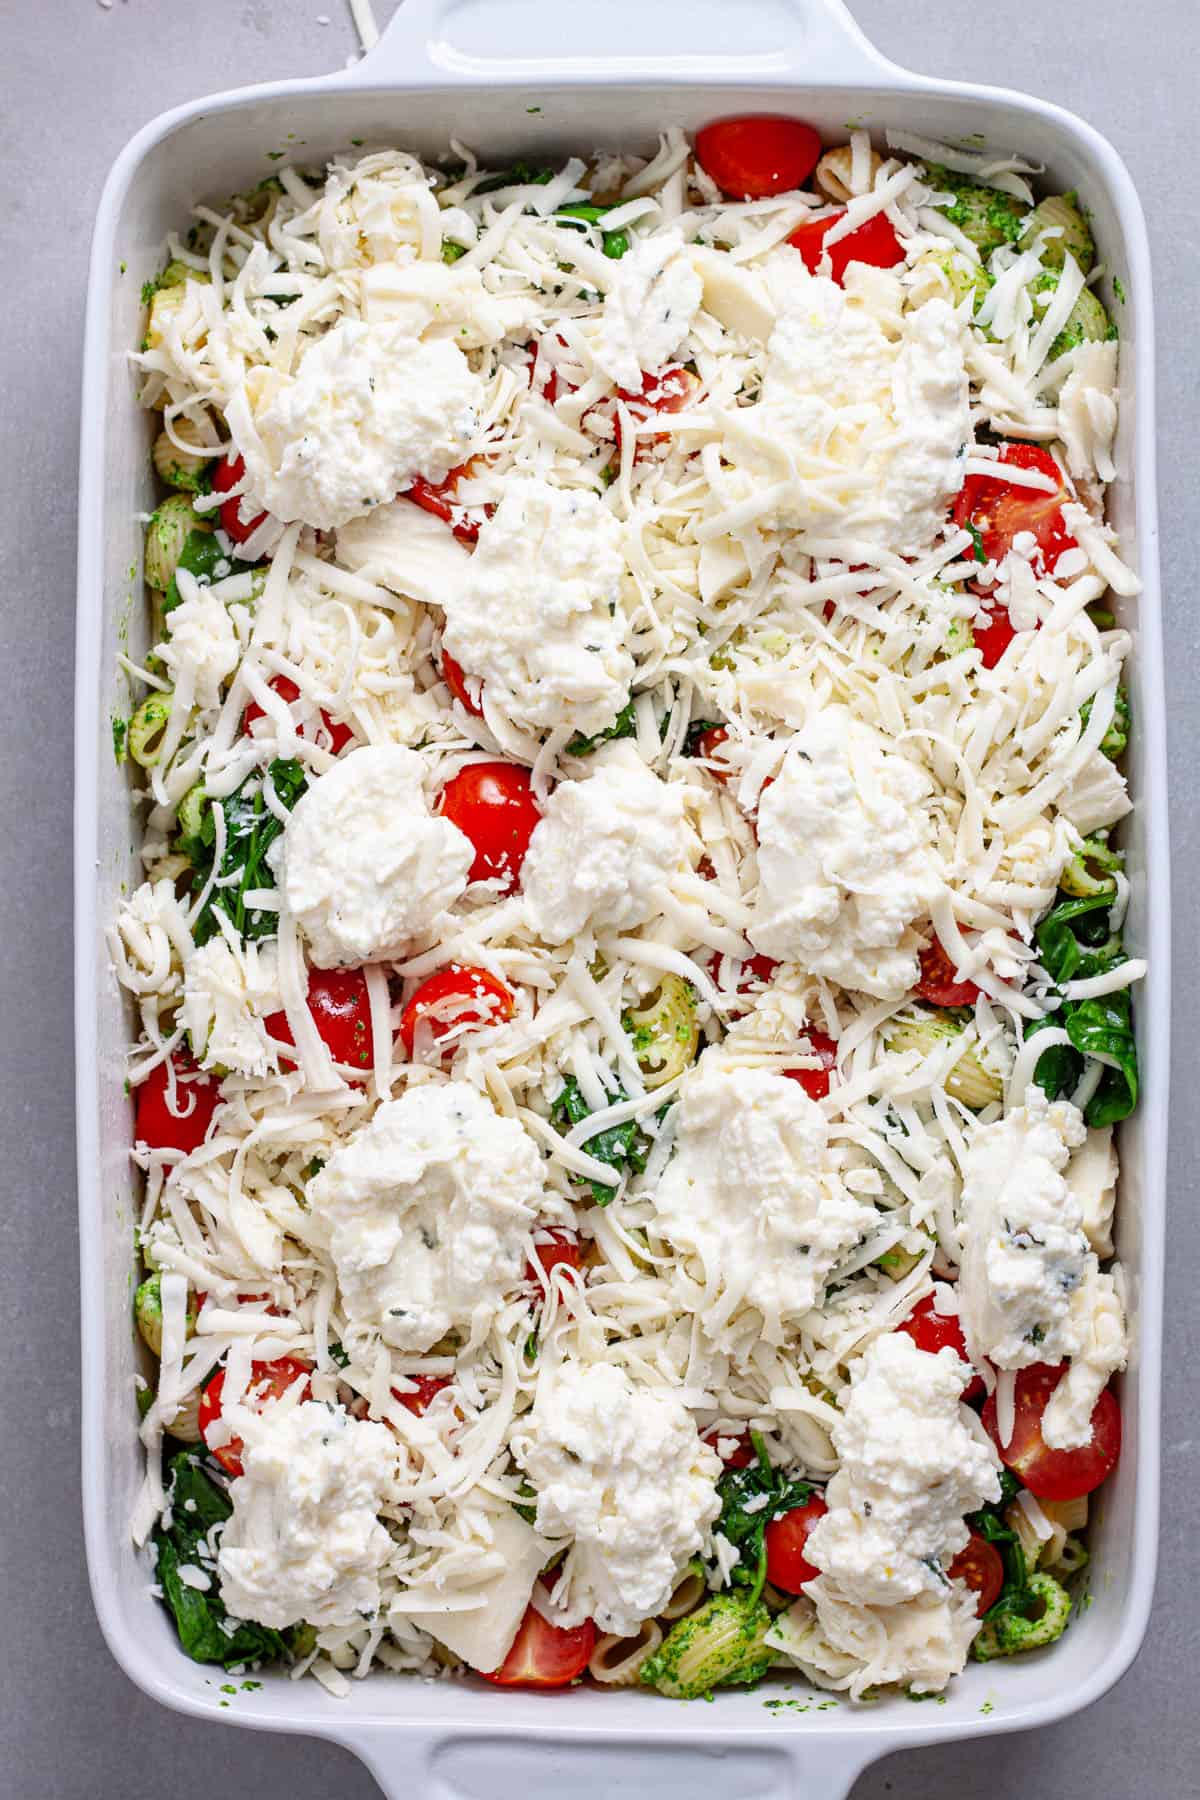 A casserole dish of pasta and pesto with ricotta and mozzarella scattered on top, along with tomatoes and spinach.